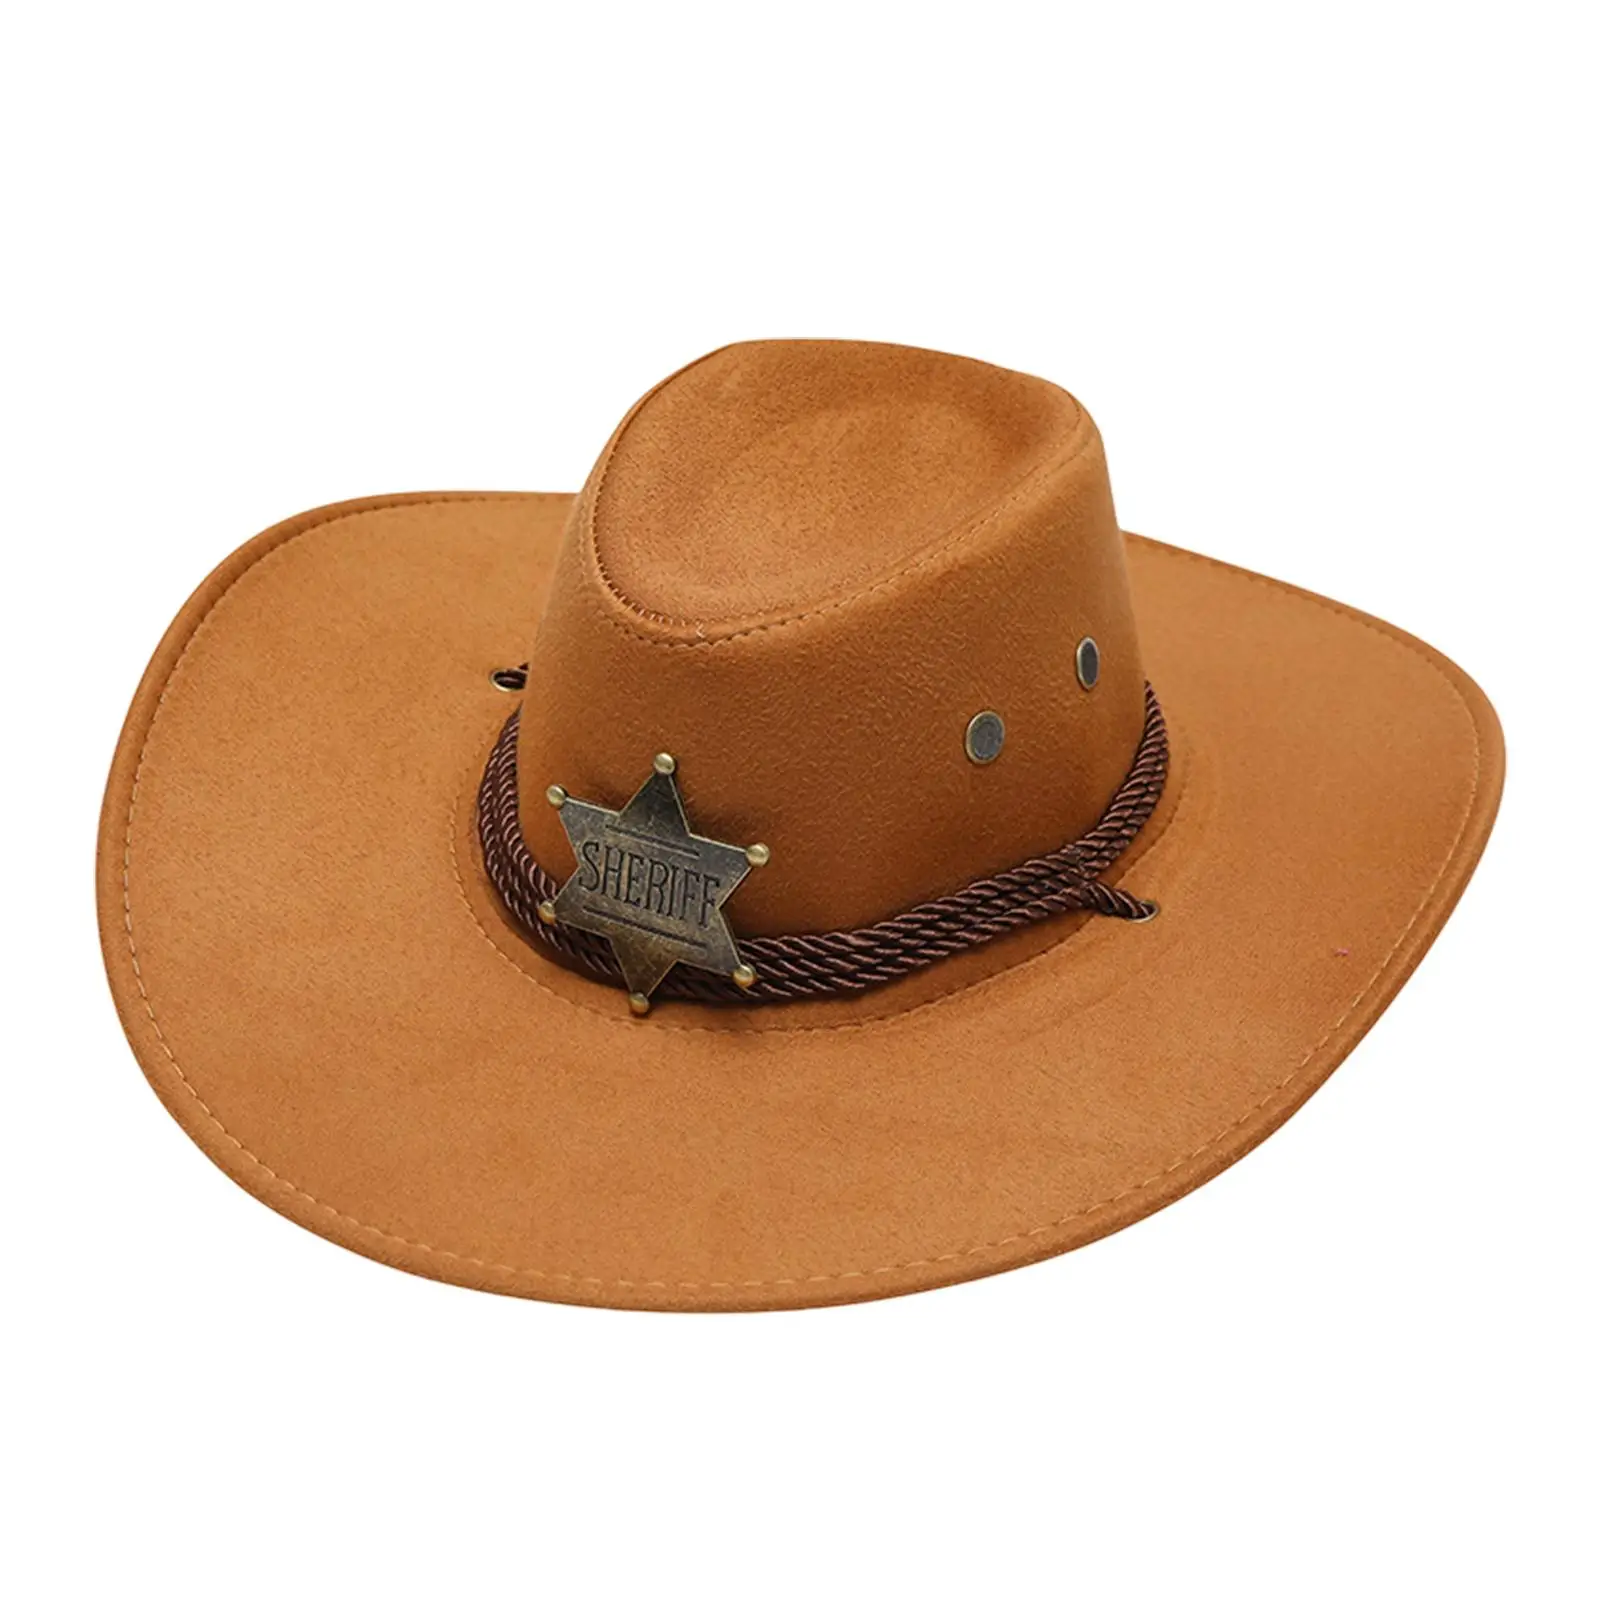 Western  Hat Women with Chin Strap Sombrero Stylish Unisex Cowgirl Hat Sun Hat for Beach Camping Cosplay Festivals Fishing